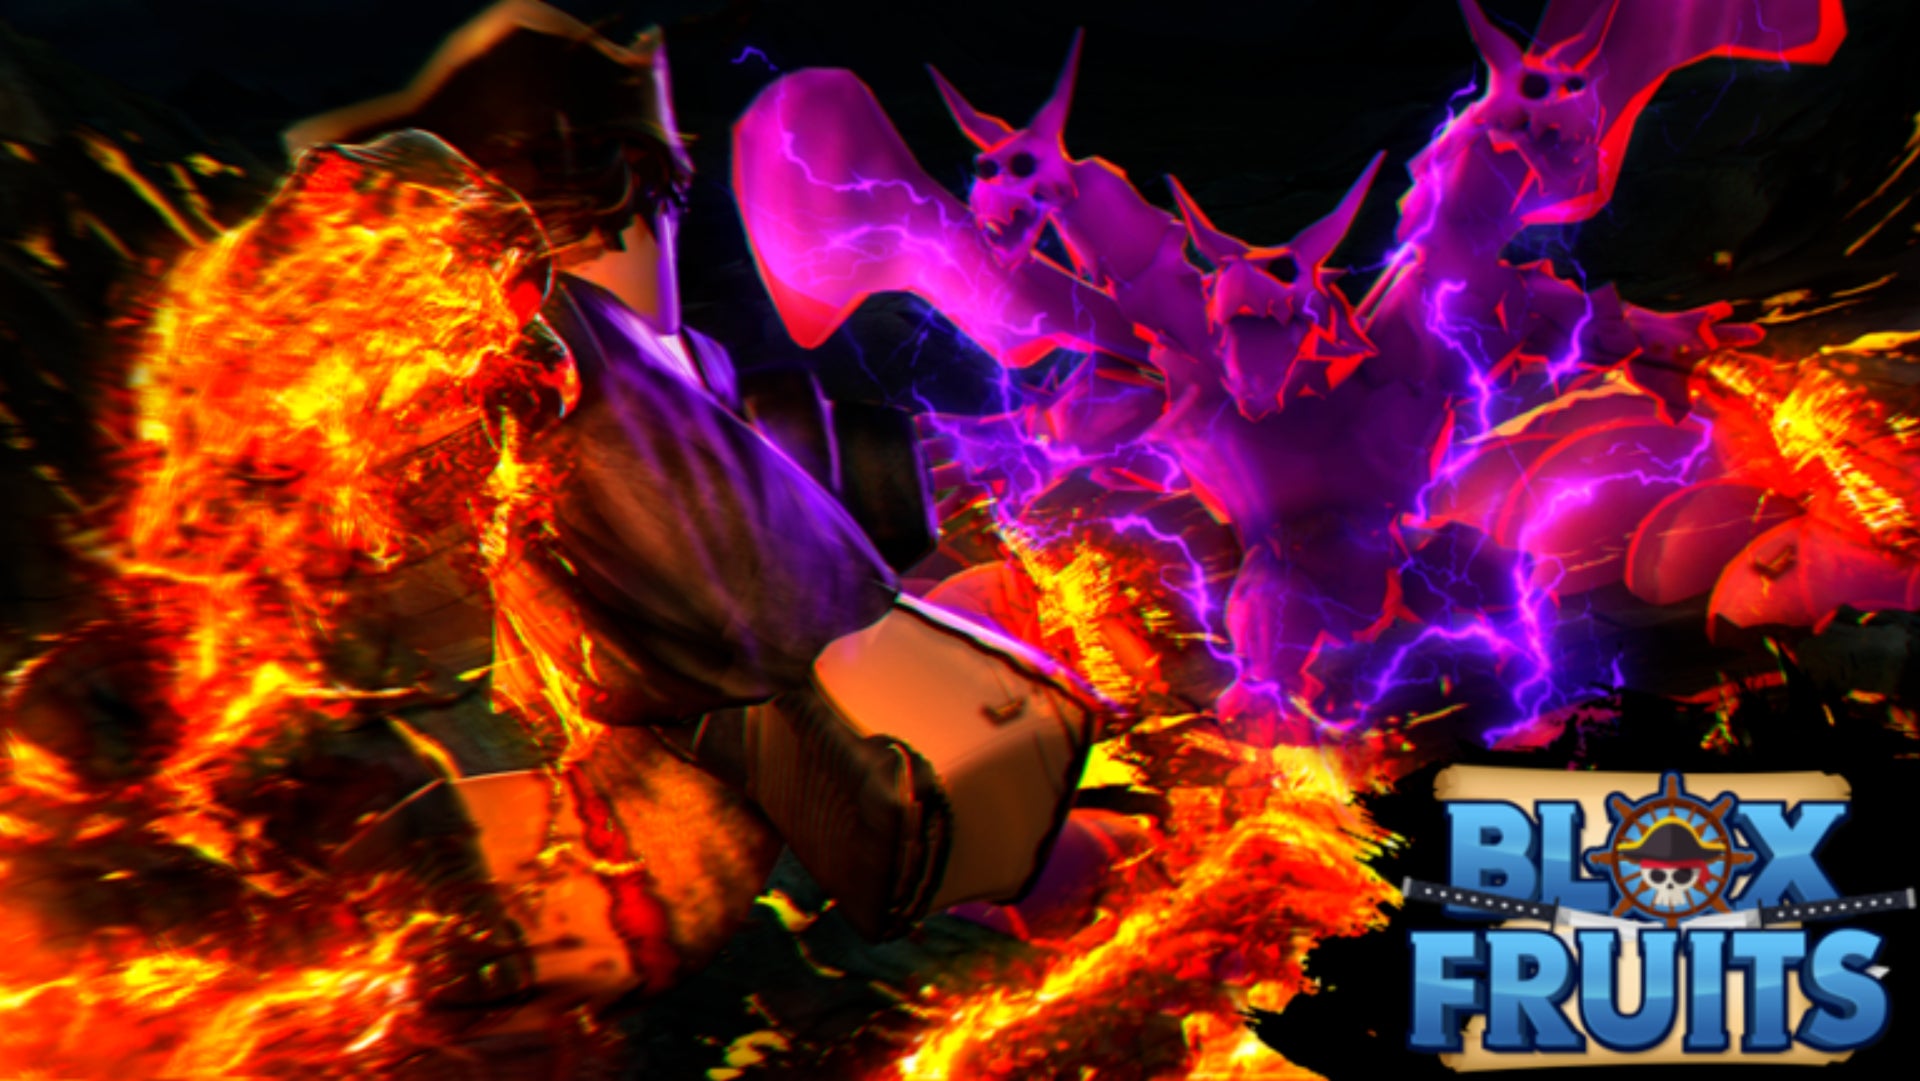 Roblox official Blox Fruits artwork, a purple creature is facing a pirate engulfed in flames